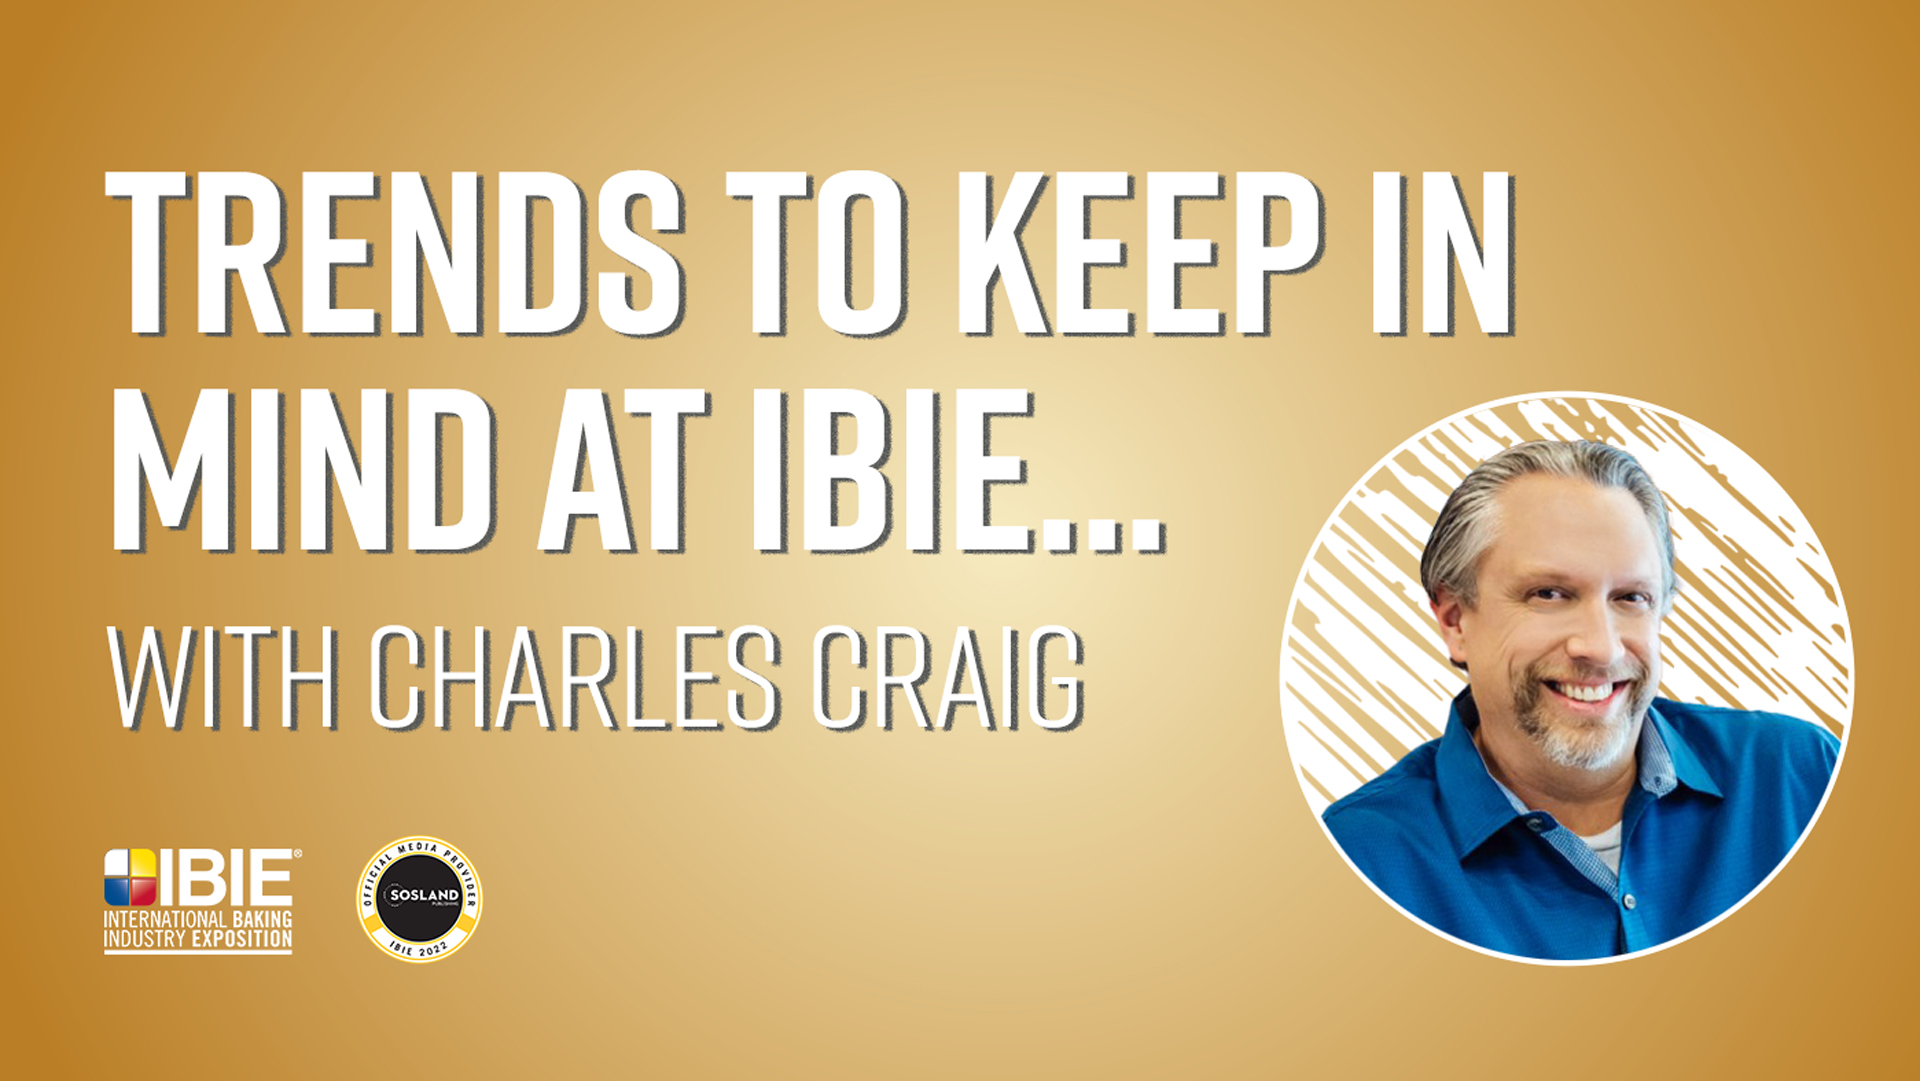 Trends with charles craig